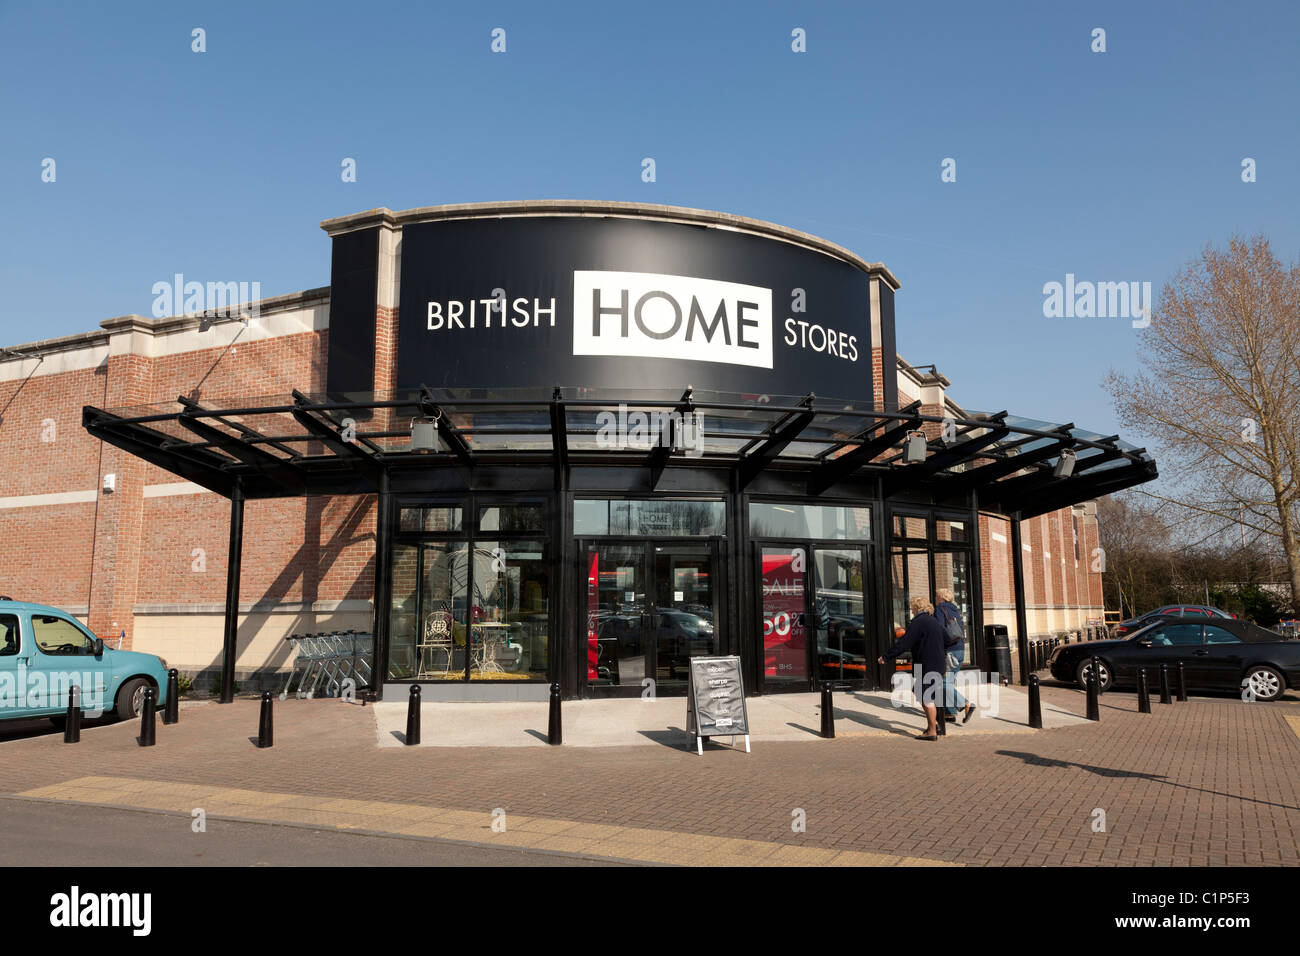 British Home Stores exterior of shop Stock Photo